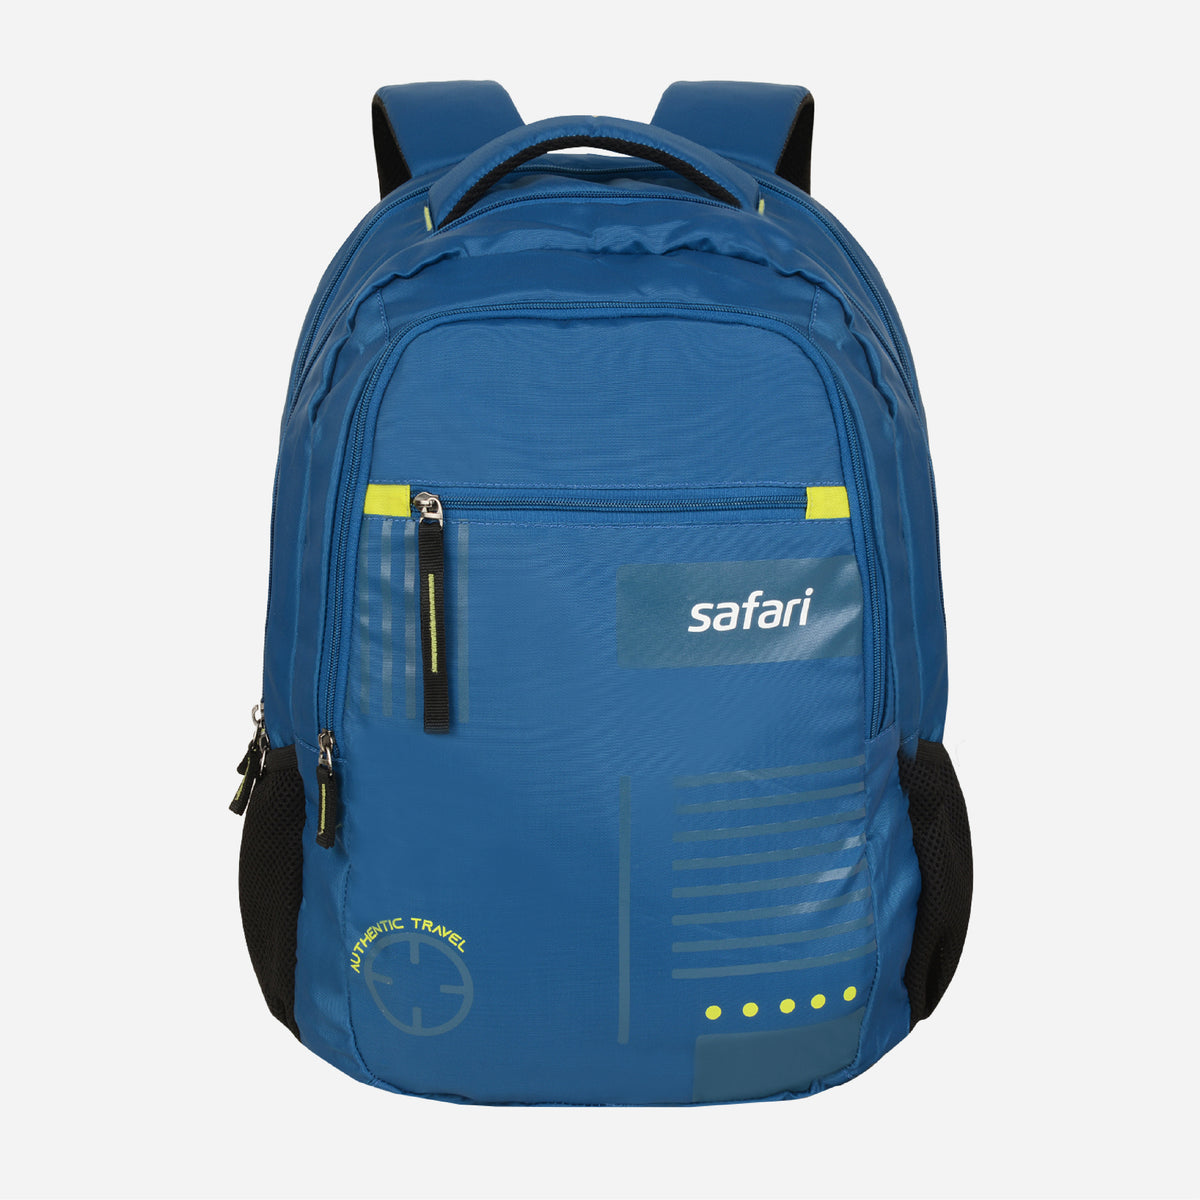 Swagpack Laptop Backpack with Raincover - Blue